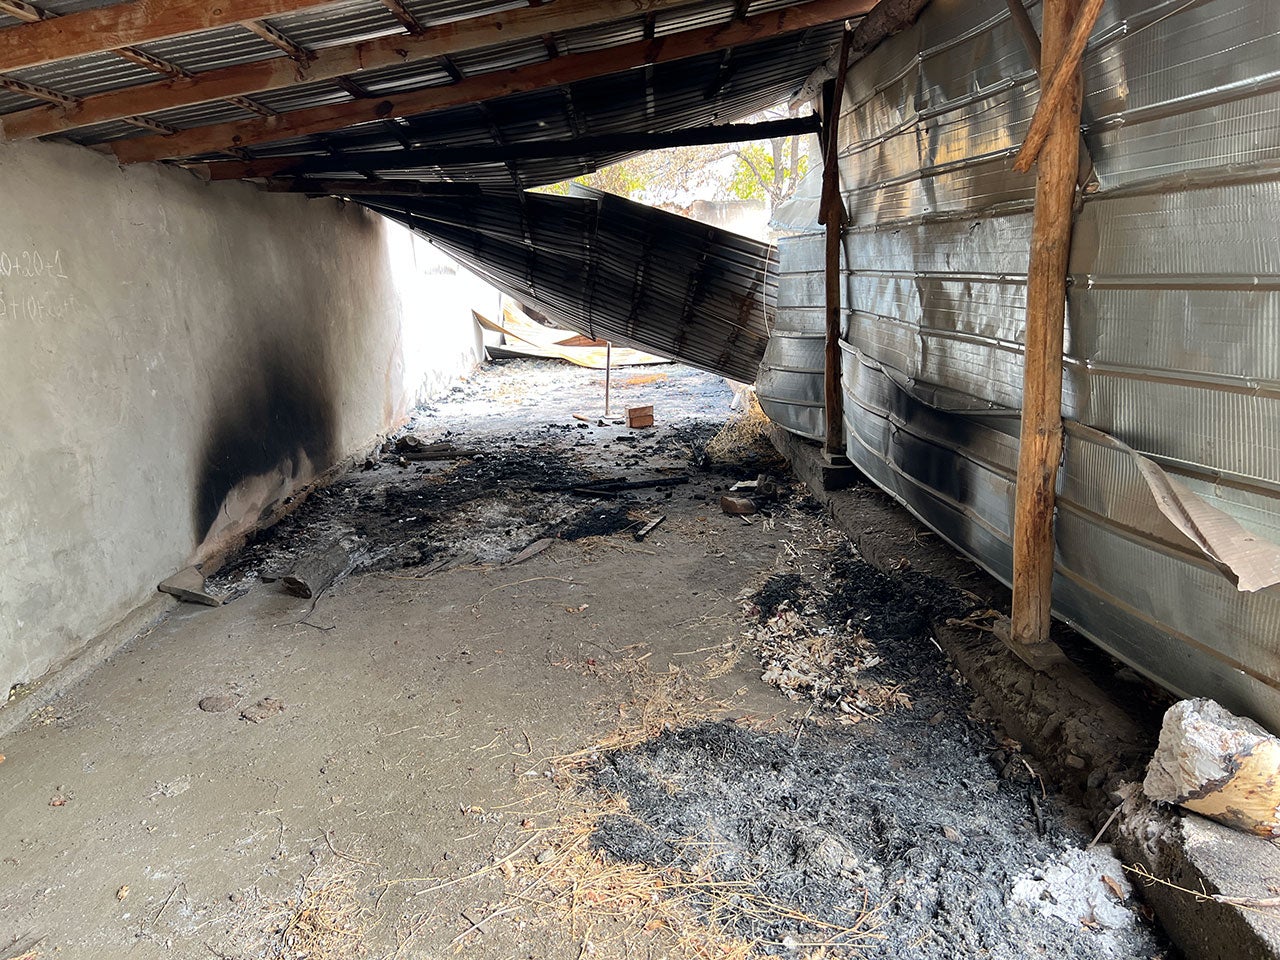 Fire damage inside a commercial building in the Kyrgyz village of Dostuk (Batken district). The village was completely destroyed by fire  while briefly under the control of Tajik forces on September 16, 2022.